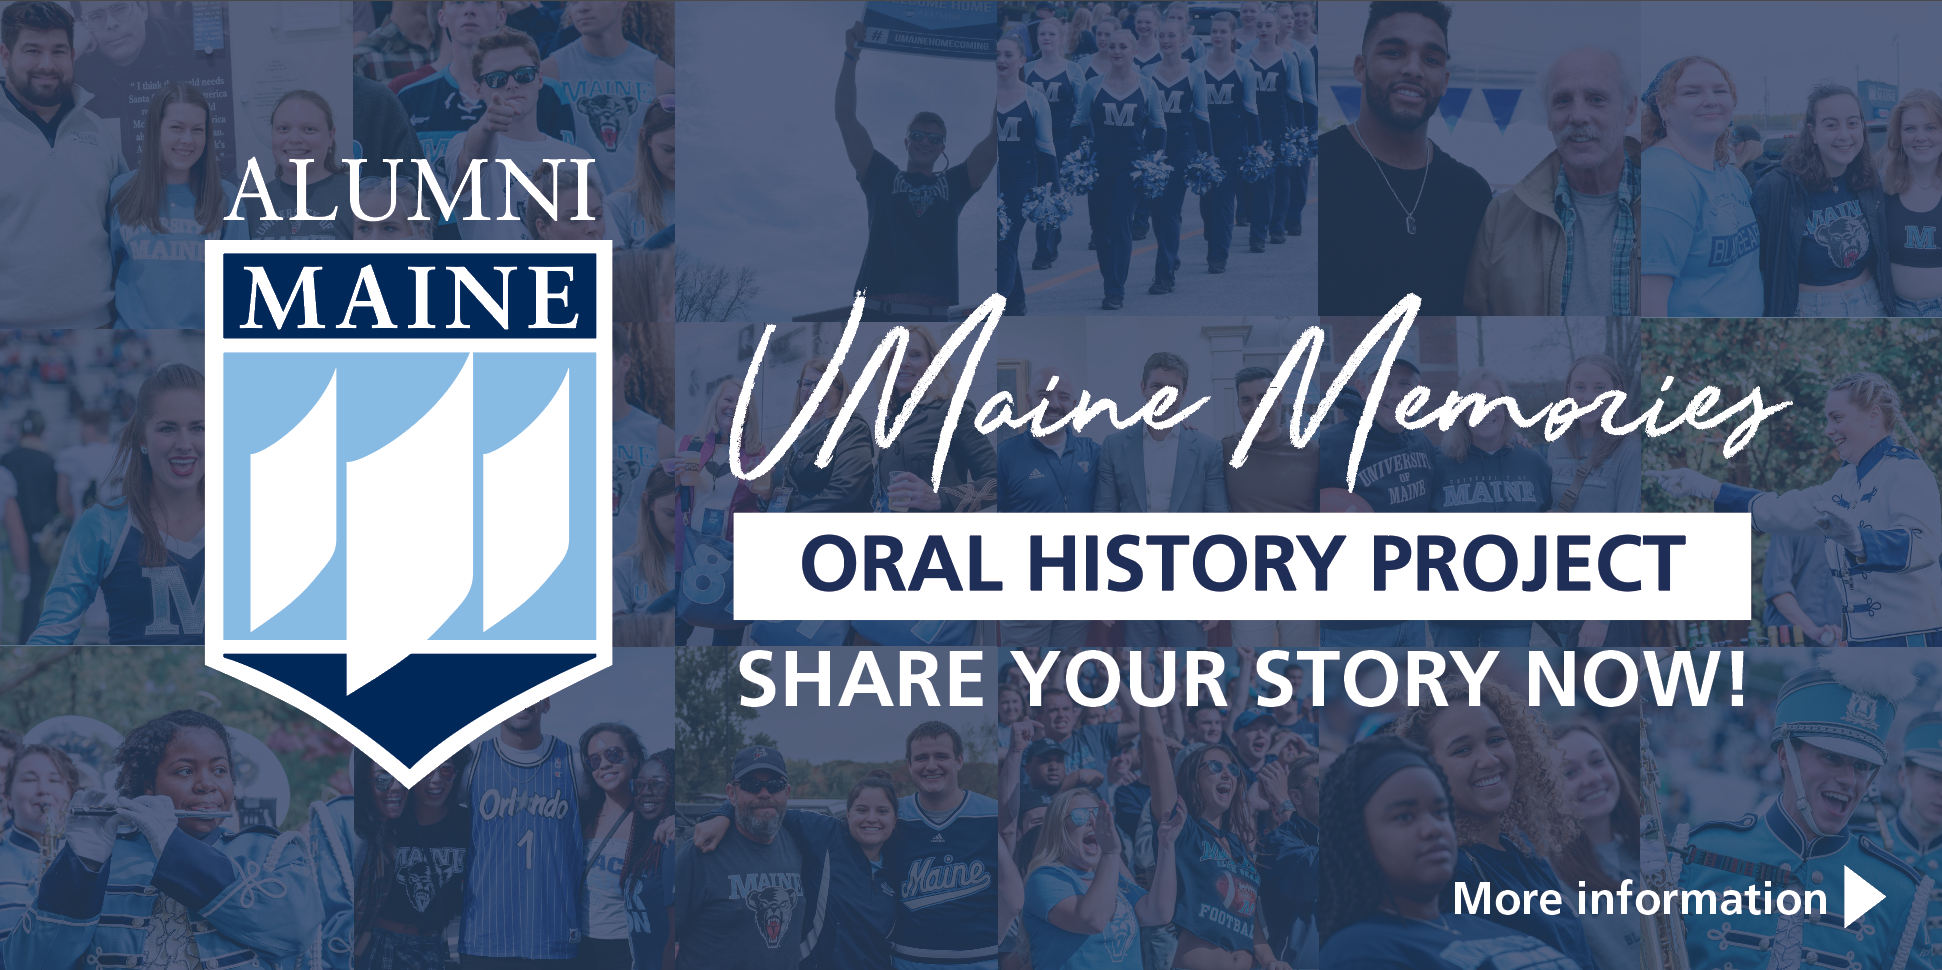 UMaine Memories - Oral History Project. Share your story now!